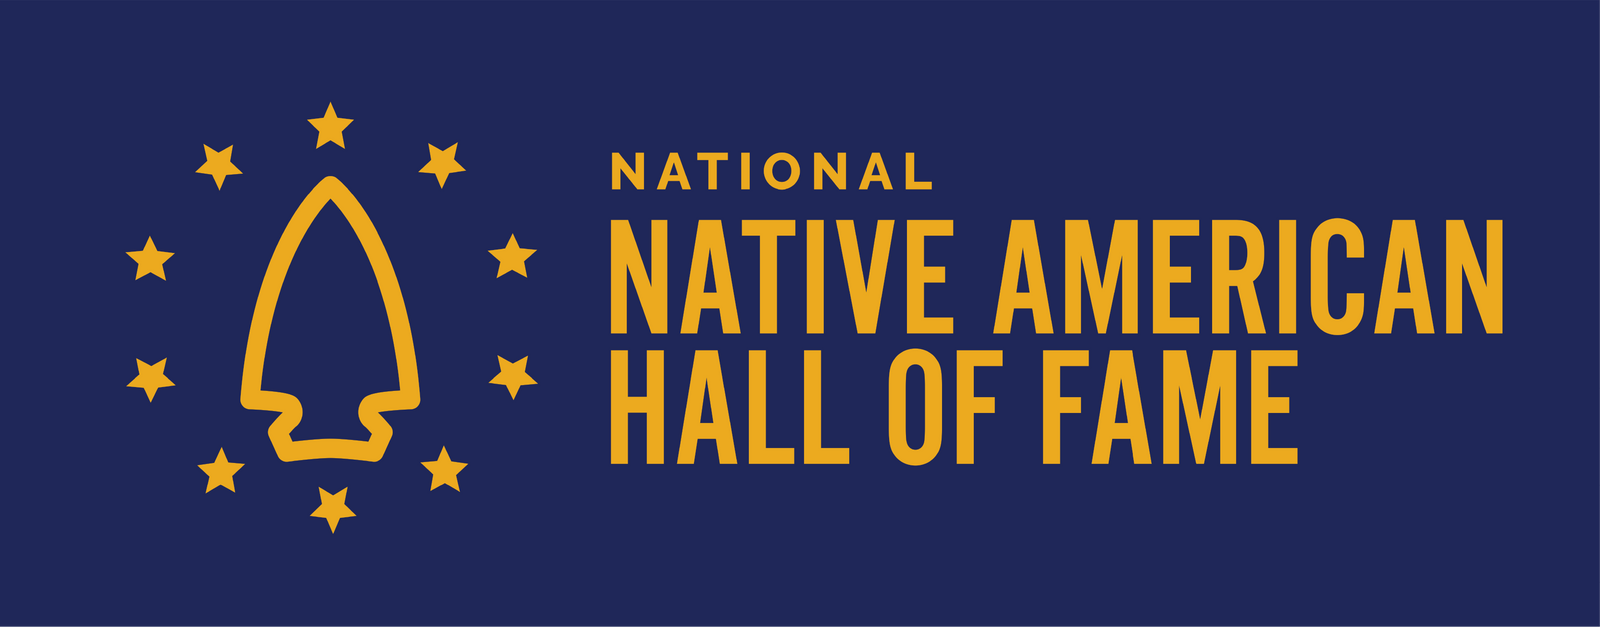 THE NATIONAL NATIVE AMERICAN HALL OF FAME ANNOUNCES THE 2023 CLASS OF INDUCTEES